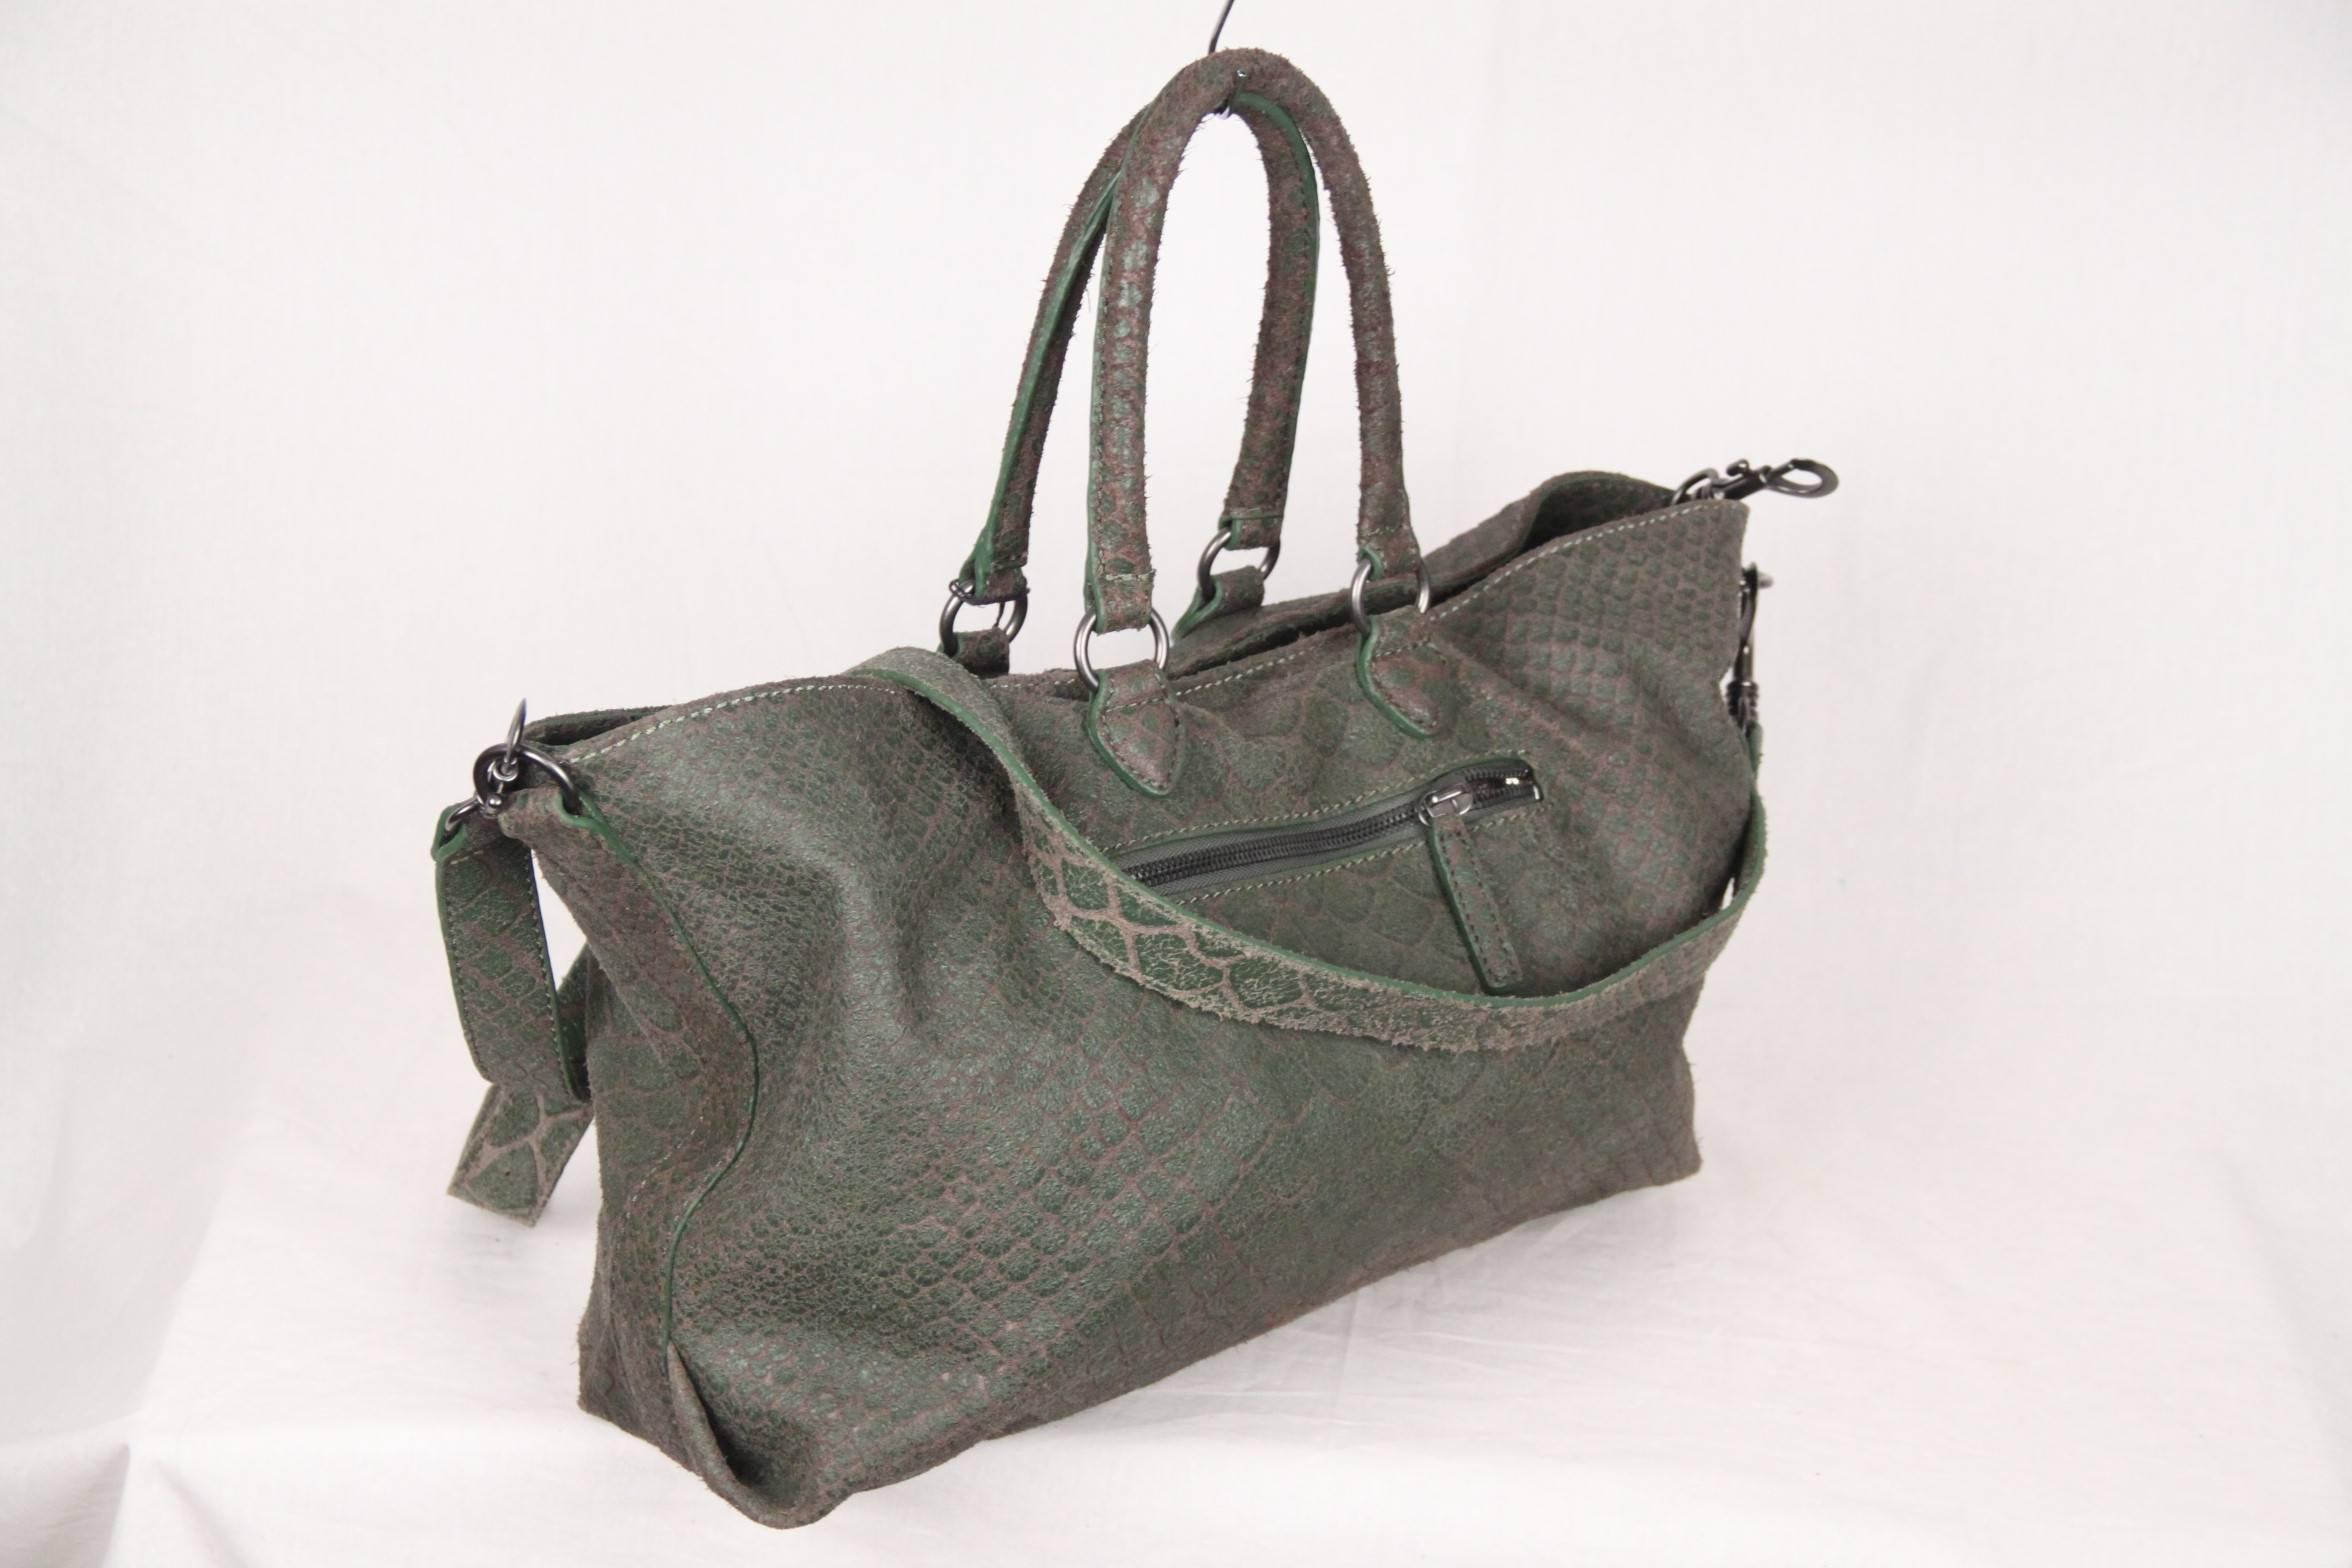 
- Snake embossed leather large 'Maxine' tote with dual rolled top handles
- Green color
- Detachable and adjustable crossbody strap
- Gunmetal hardware
- Front zip pocket
- Magnetic snap button closure
- Snake print lining
- Two interior slip